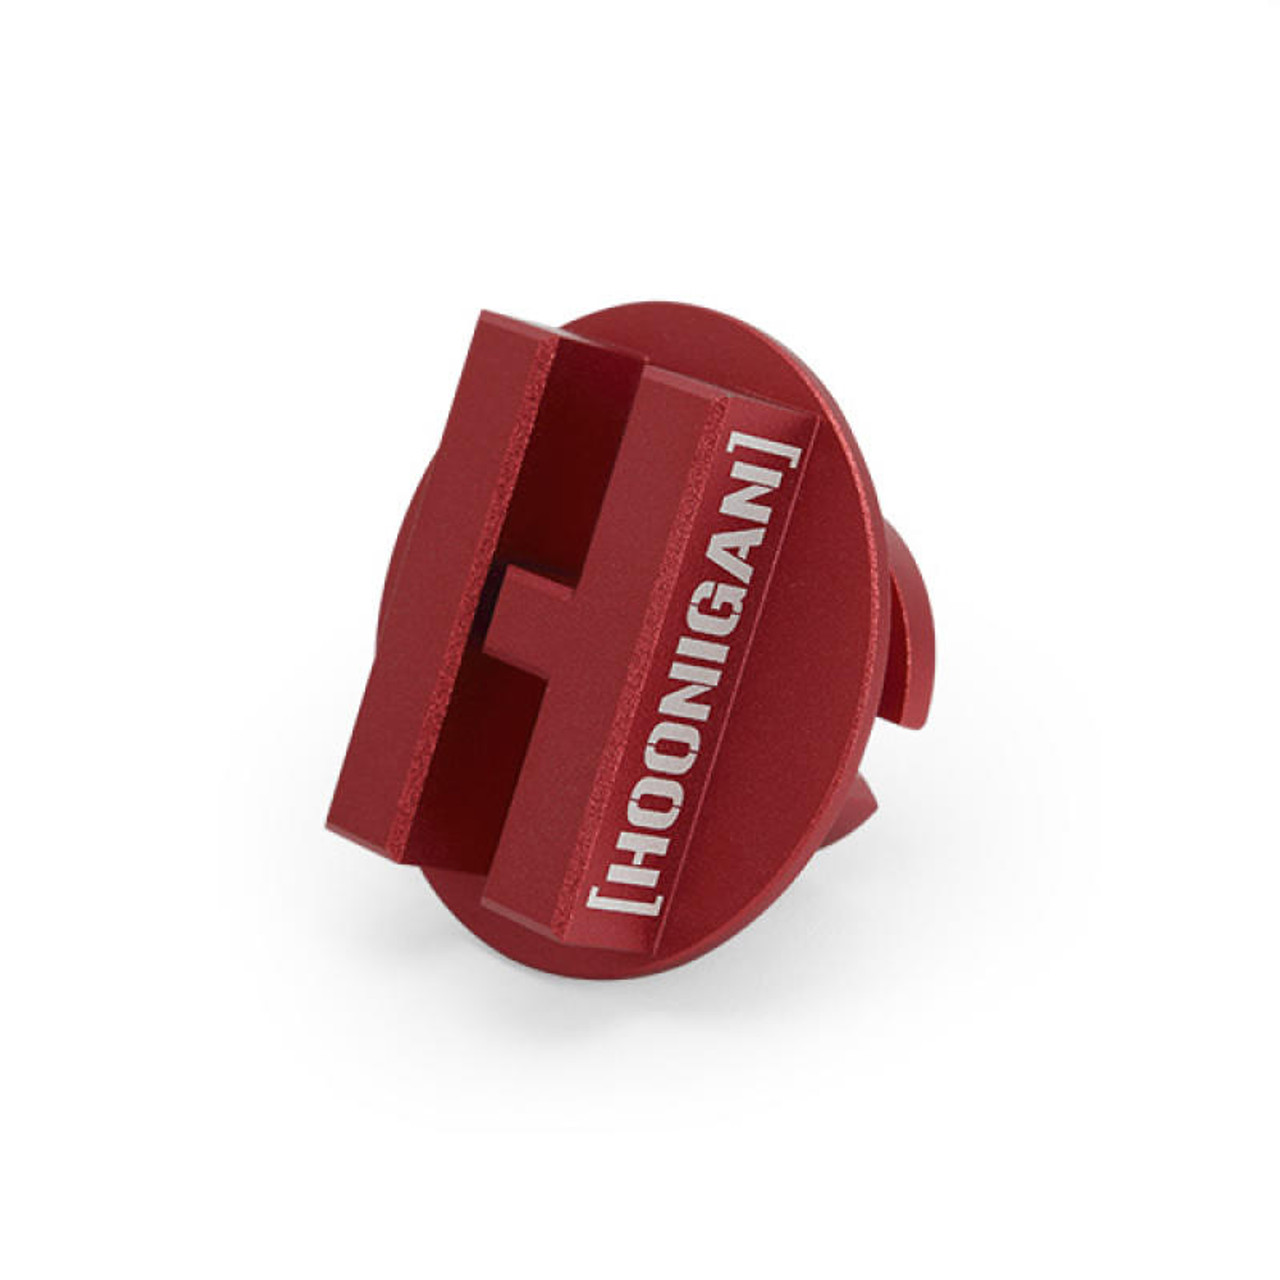 Mishimoto 2015 Ford Mustang EcoBoost/2013 Ford Focus ST Hoonigan Oil Filler Cap - Red - MMOFC-MUS4-15HRD